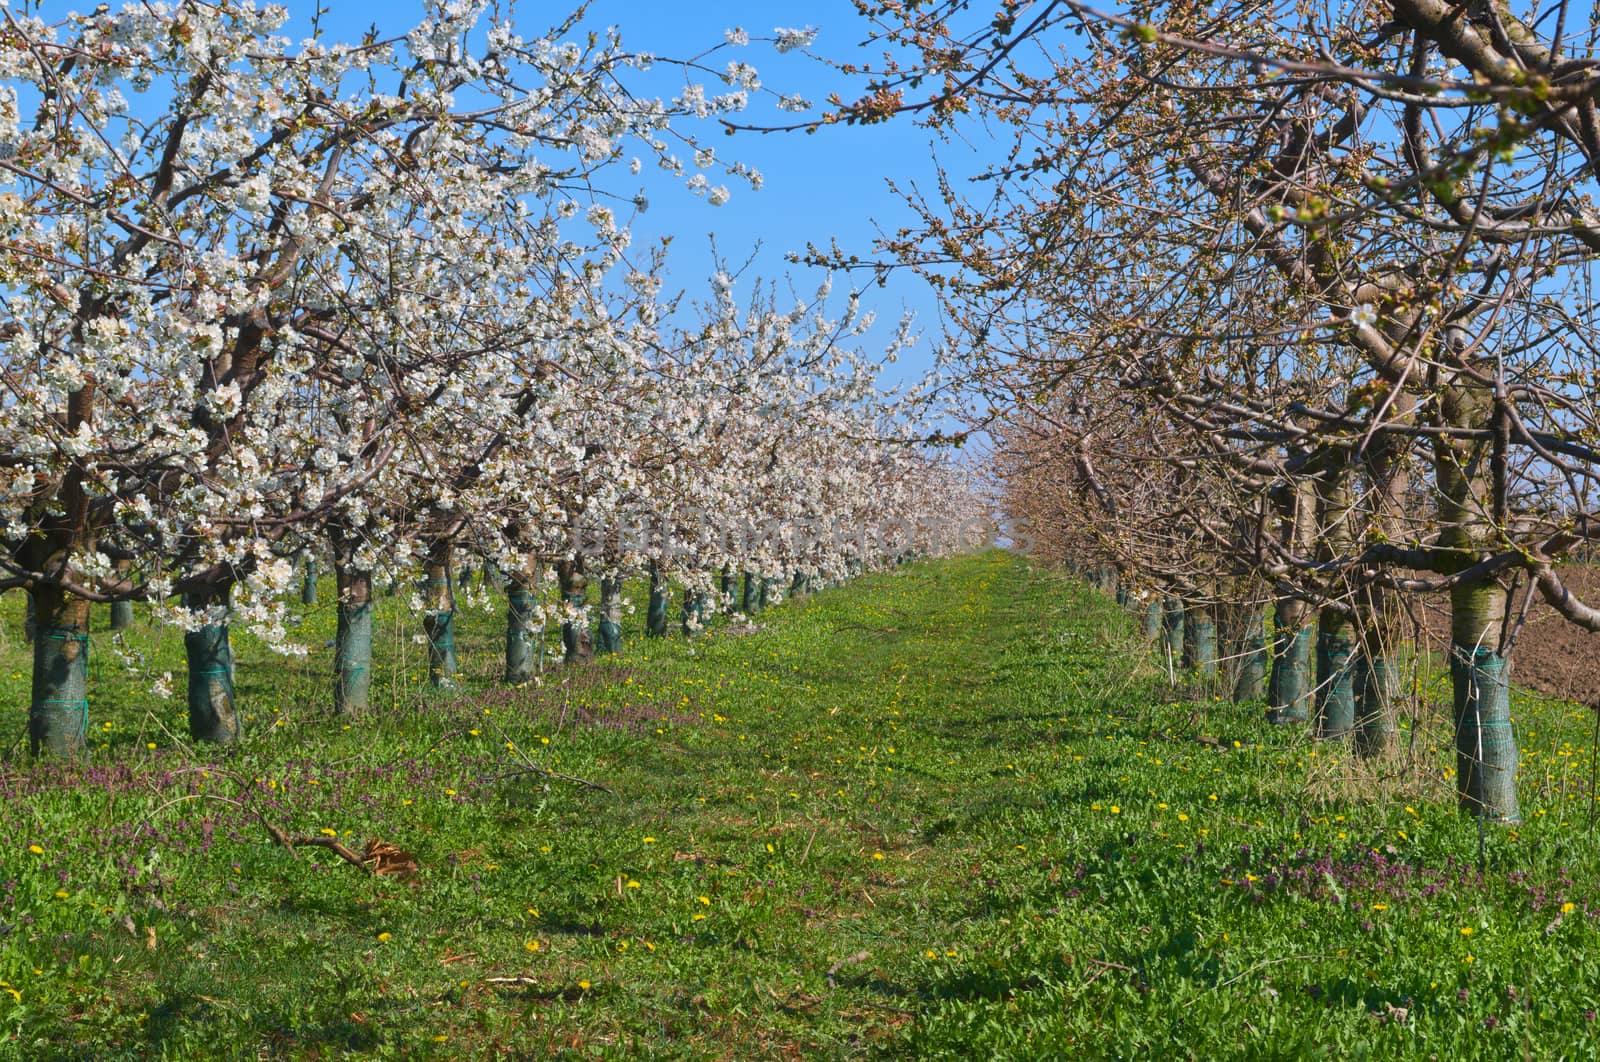 Peach trees blooming in orchard